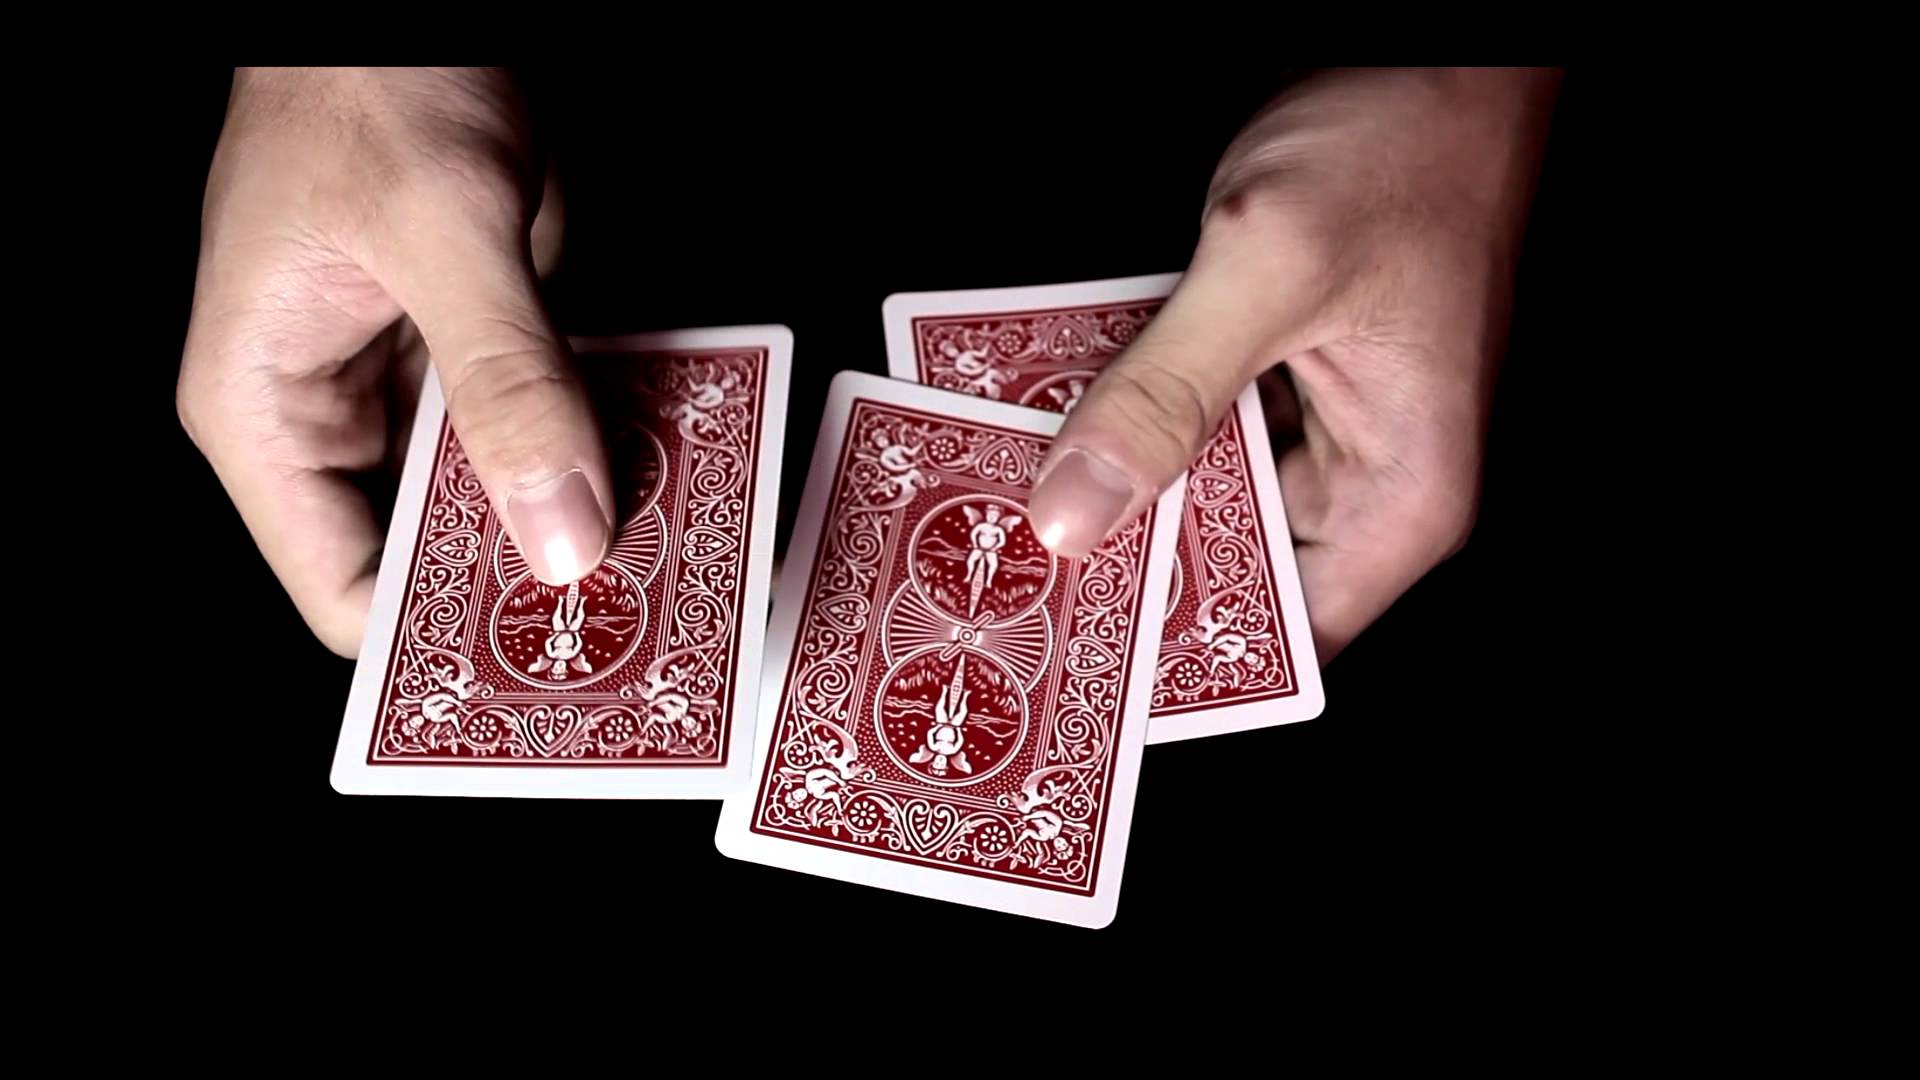 The Bend 3 Card monte trick